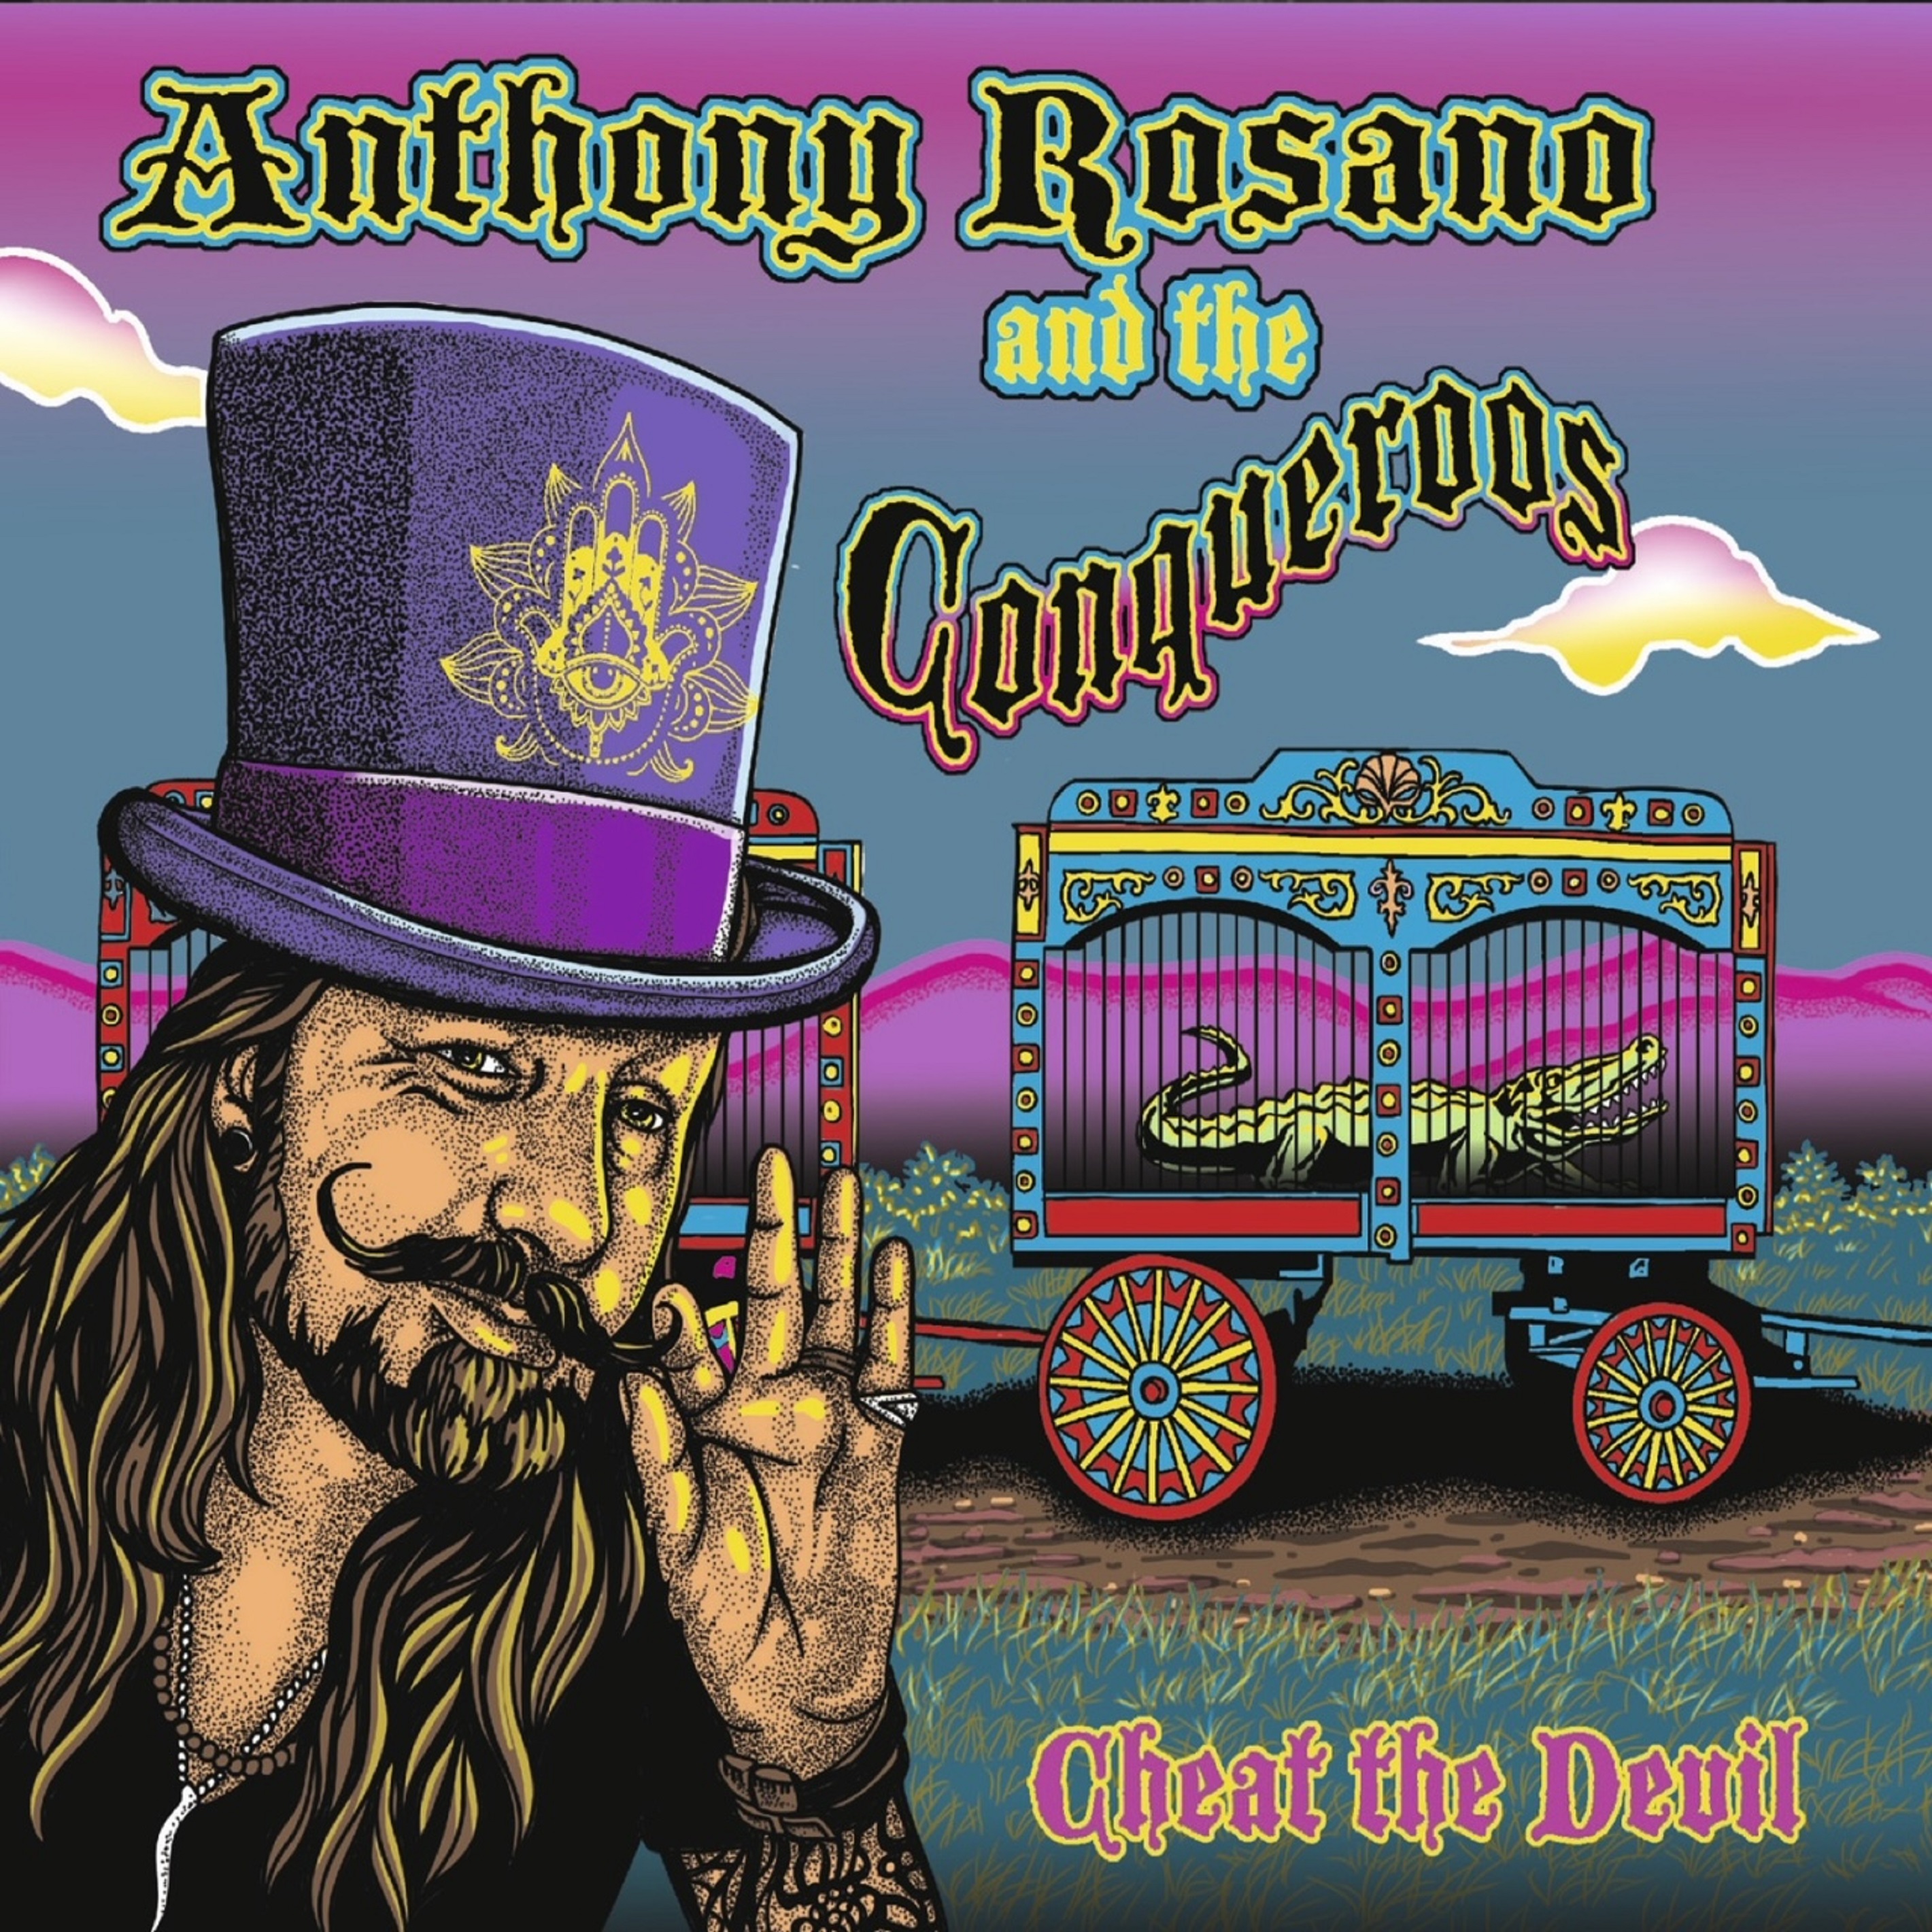 Anthony Rosano And The Conqueroos release new single + album upcoming